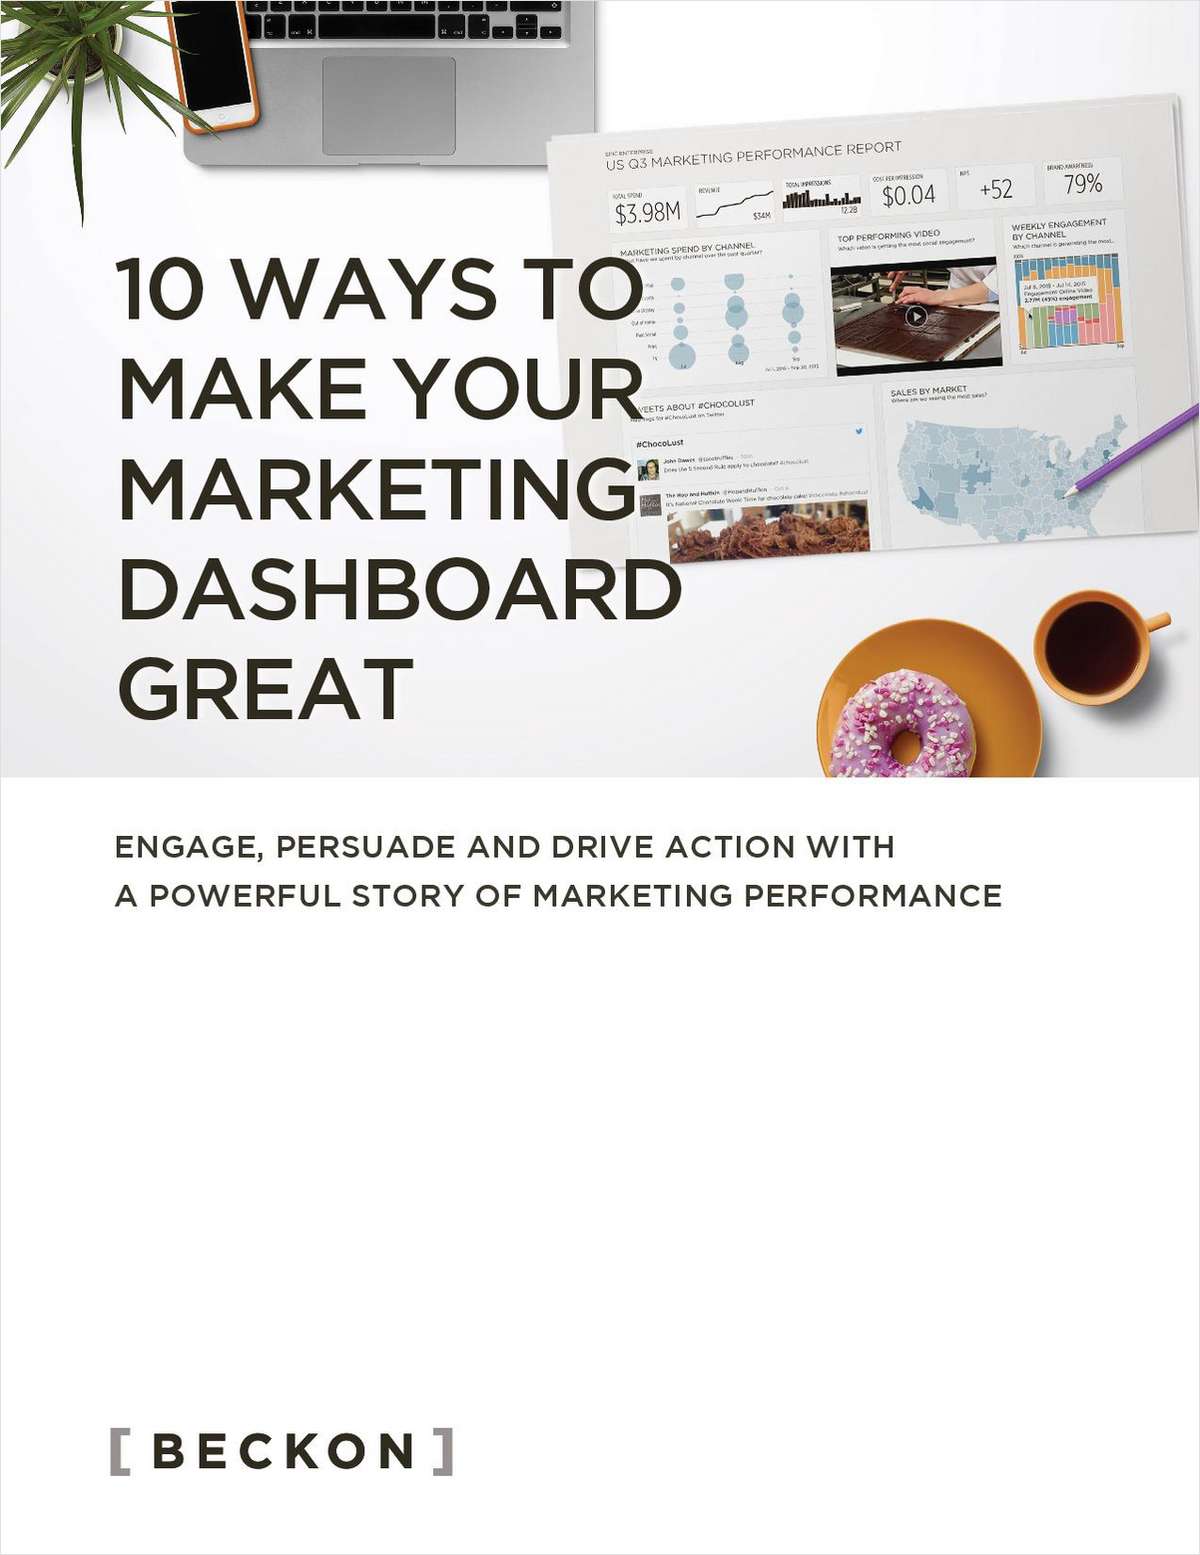 10 Ways to Make Your Marketing Dashboard Great